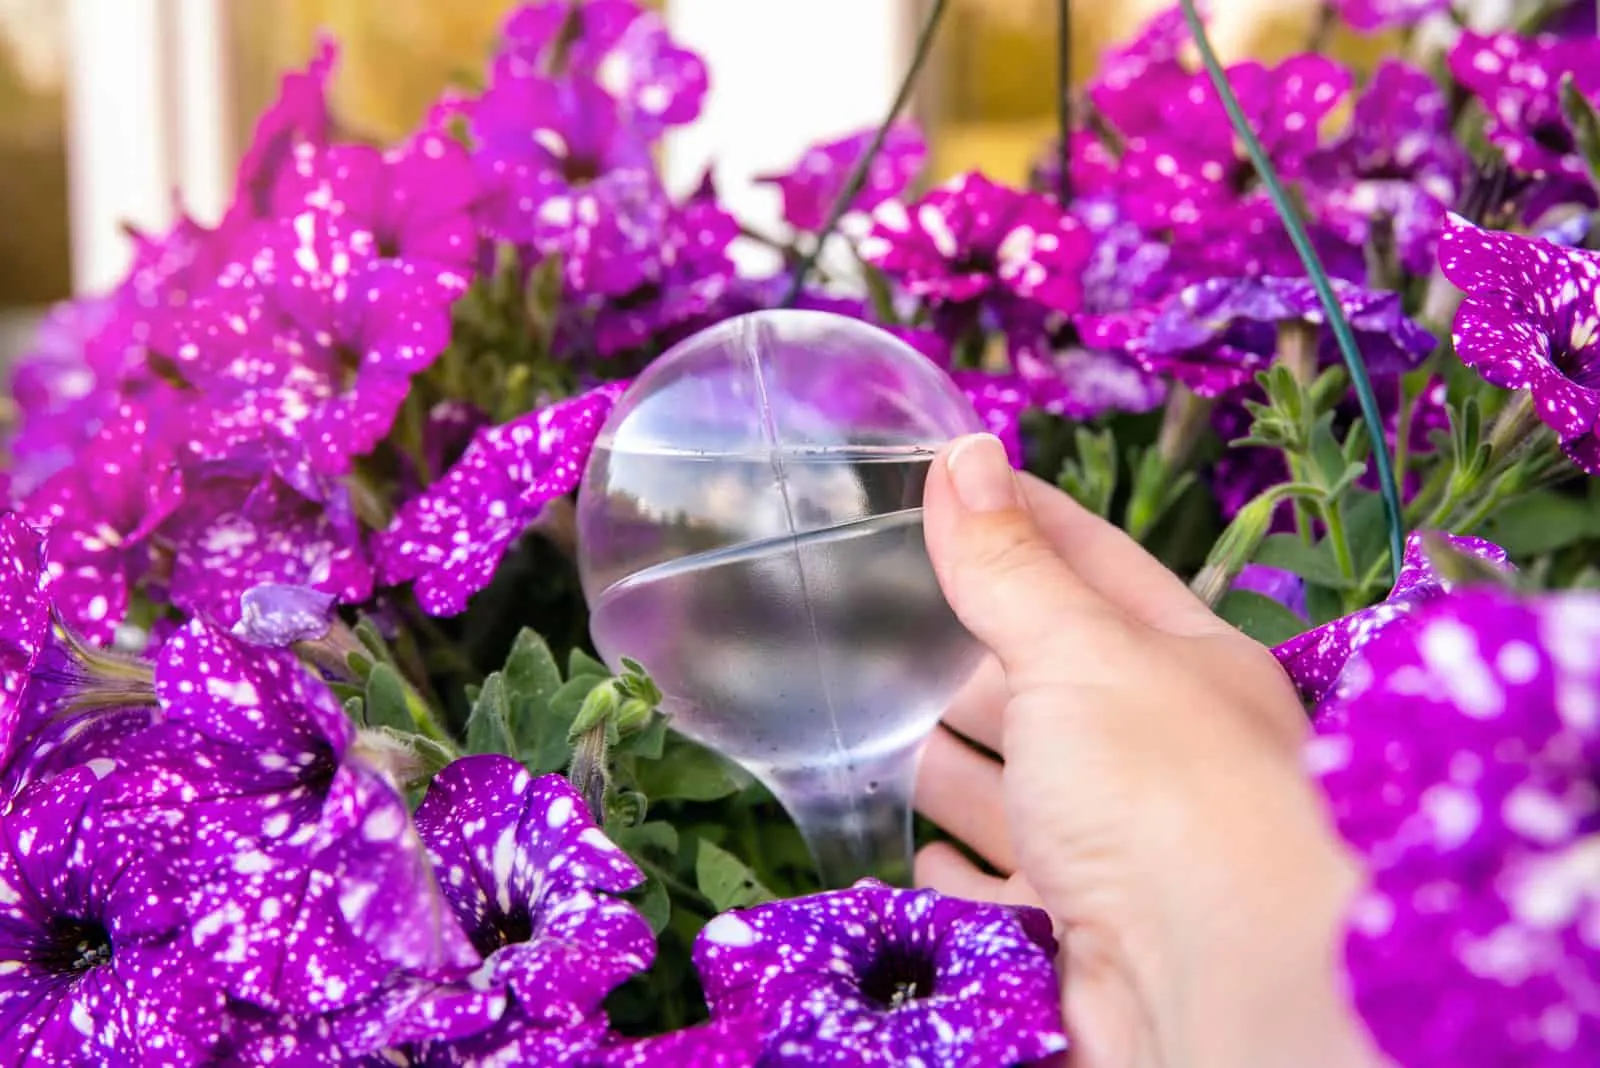 Person hand attaching self watering device globe inside potted petunia